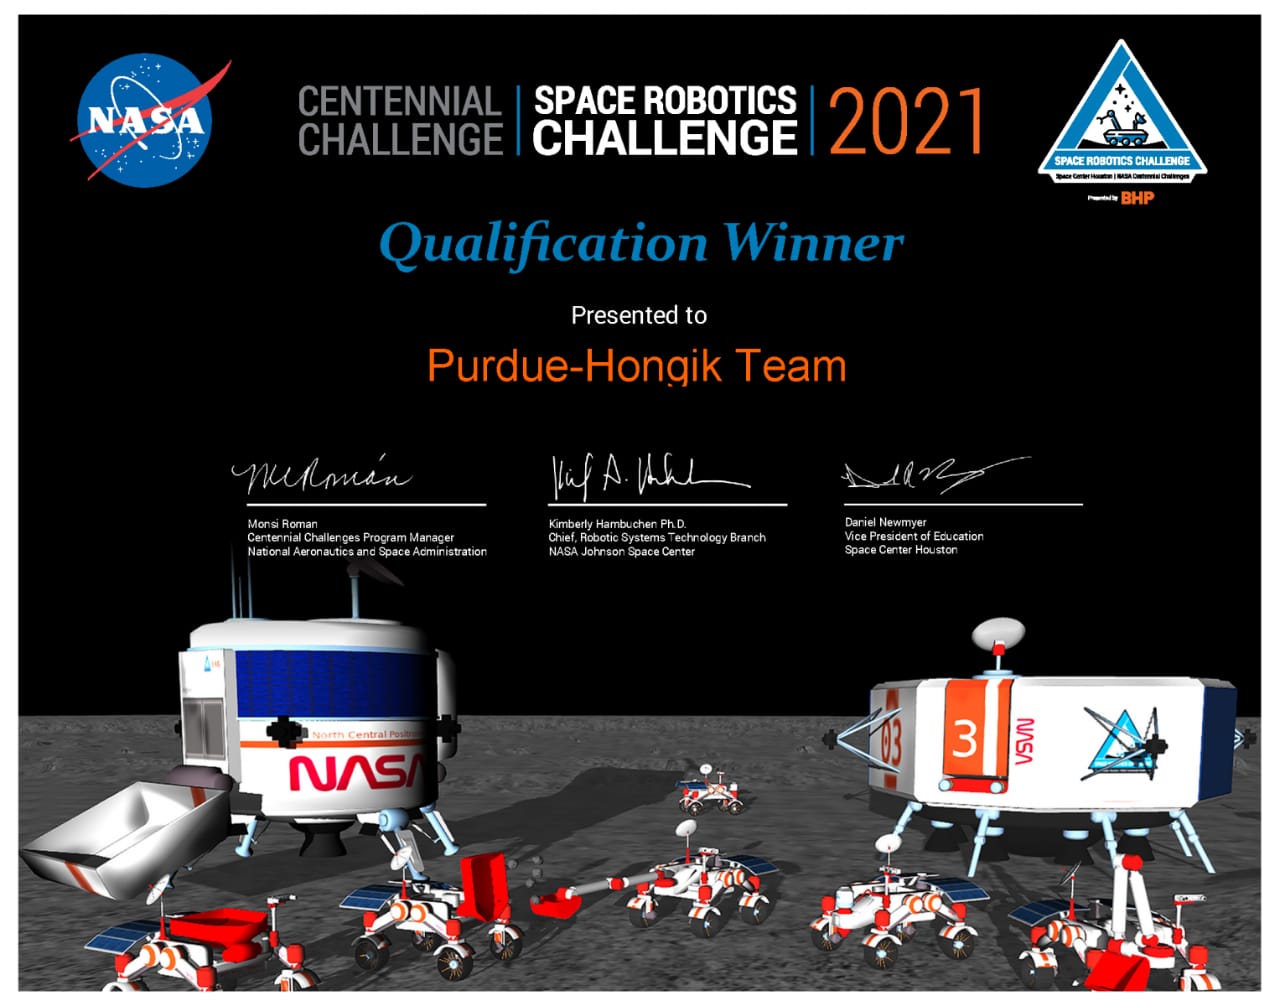 A team of researchers from Purdue University’s Polytechnic Institute and Hongik University in South Korea were designated a qualification winner for NASA's 2021 Space Robotics Challenge.